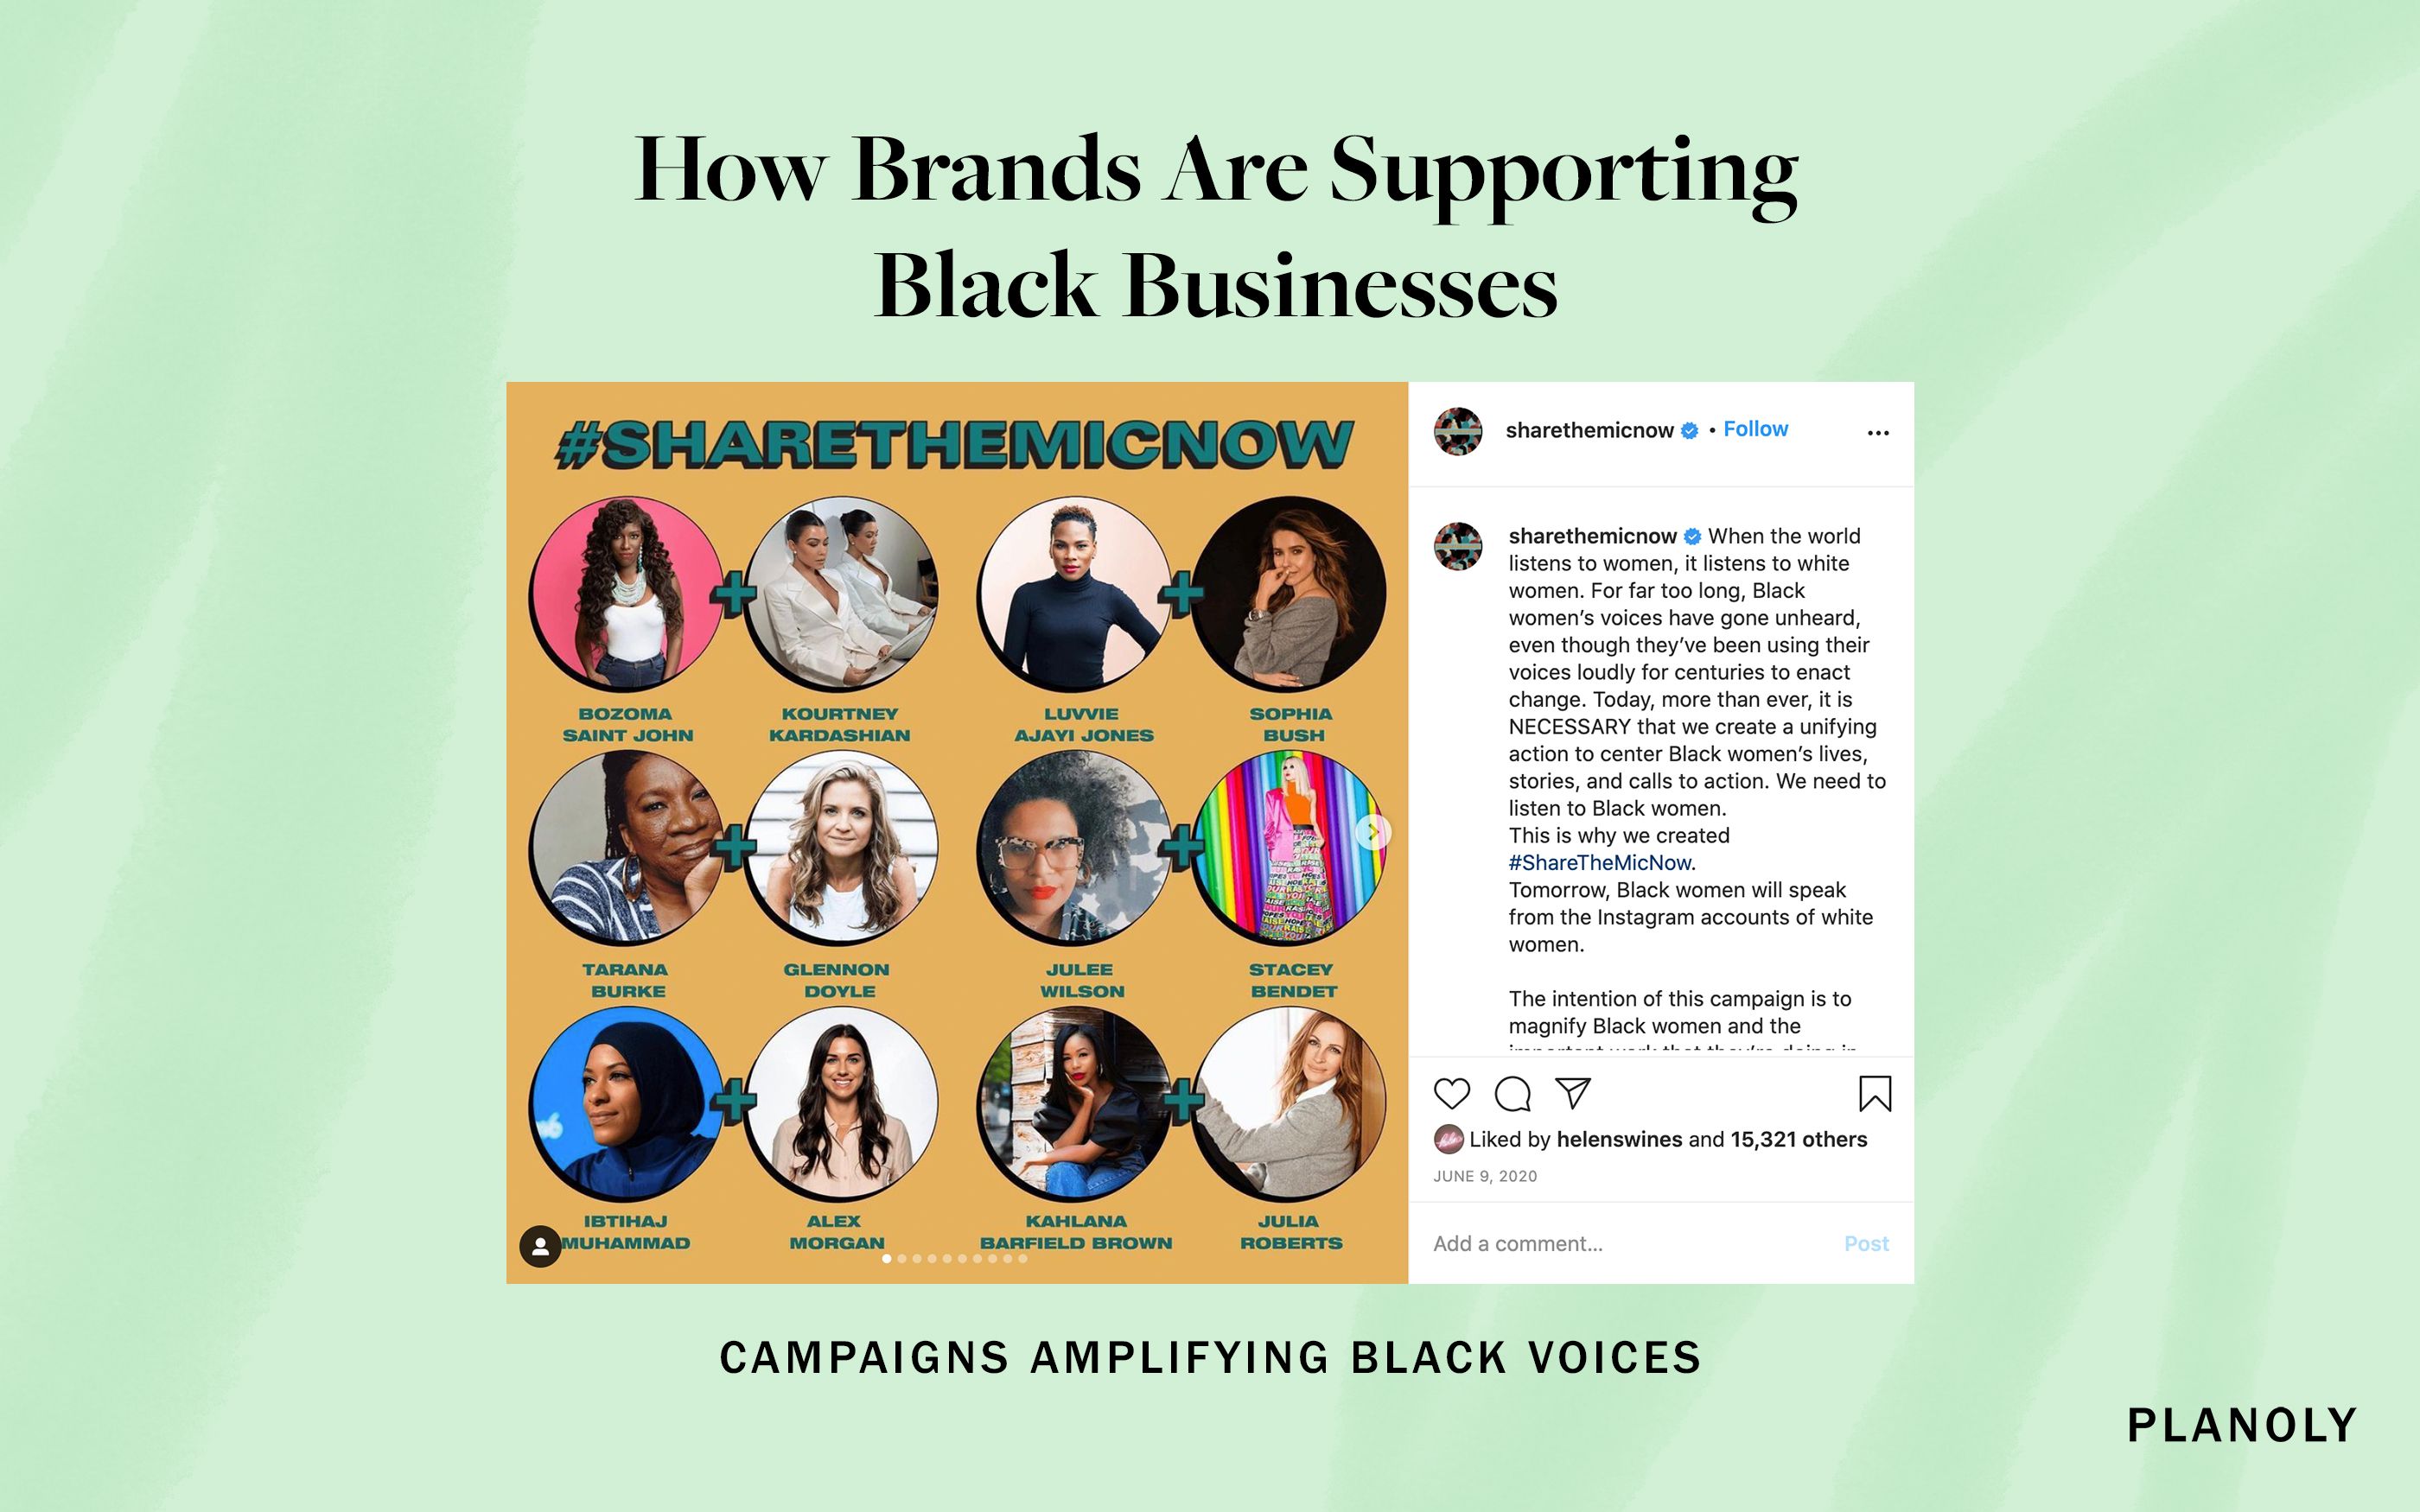 PLANOLY - Blog Post - How to Support Black Businesses - Image 2